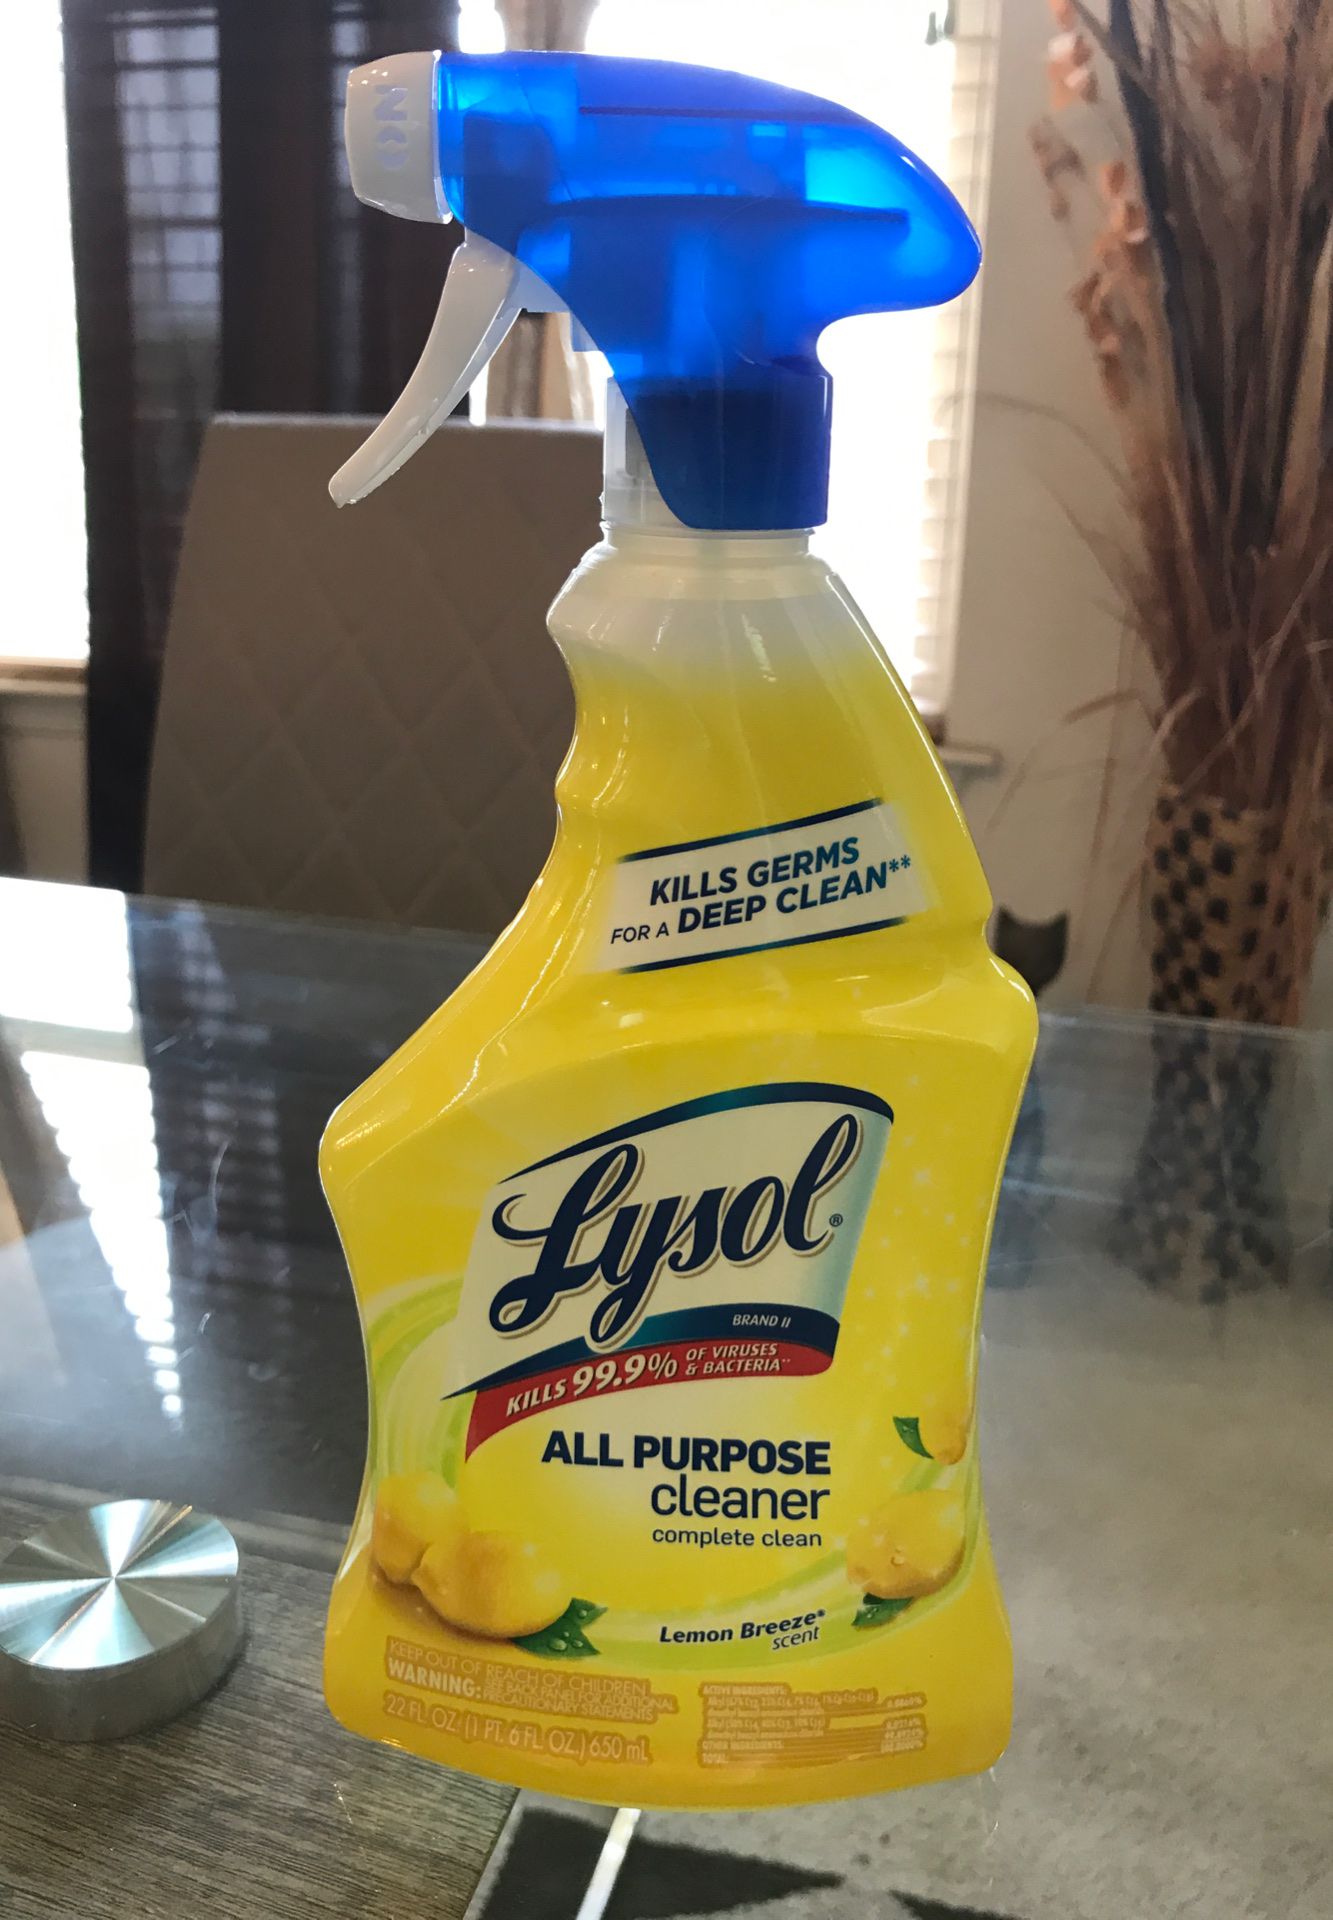 Lysol, Lemon Breeze, gets rid of 99.9% Viruses And Bacteria—-No Limit, buy as many as you need, local area pick-up, and shipping available